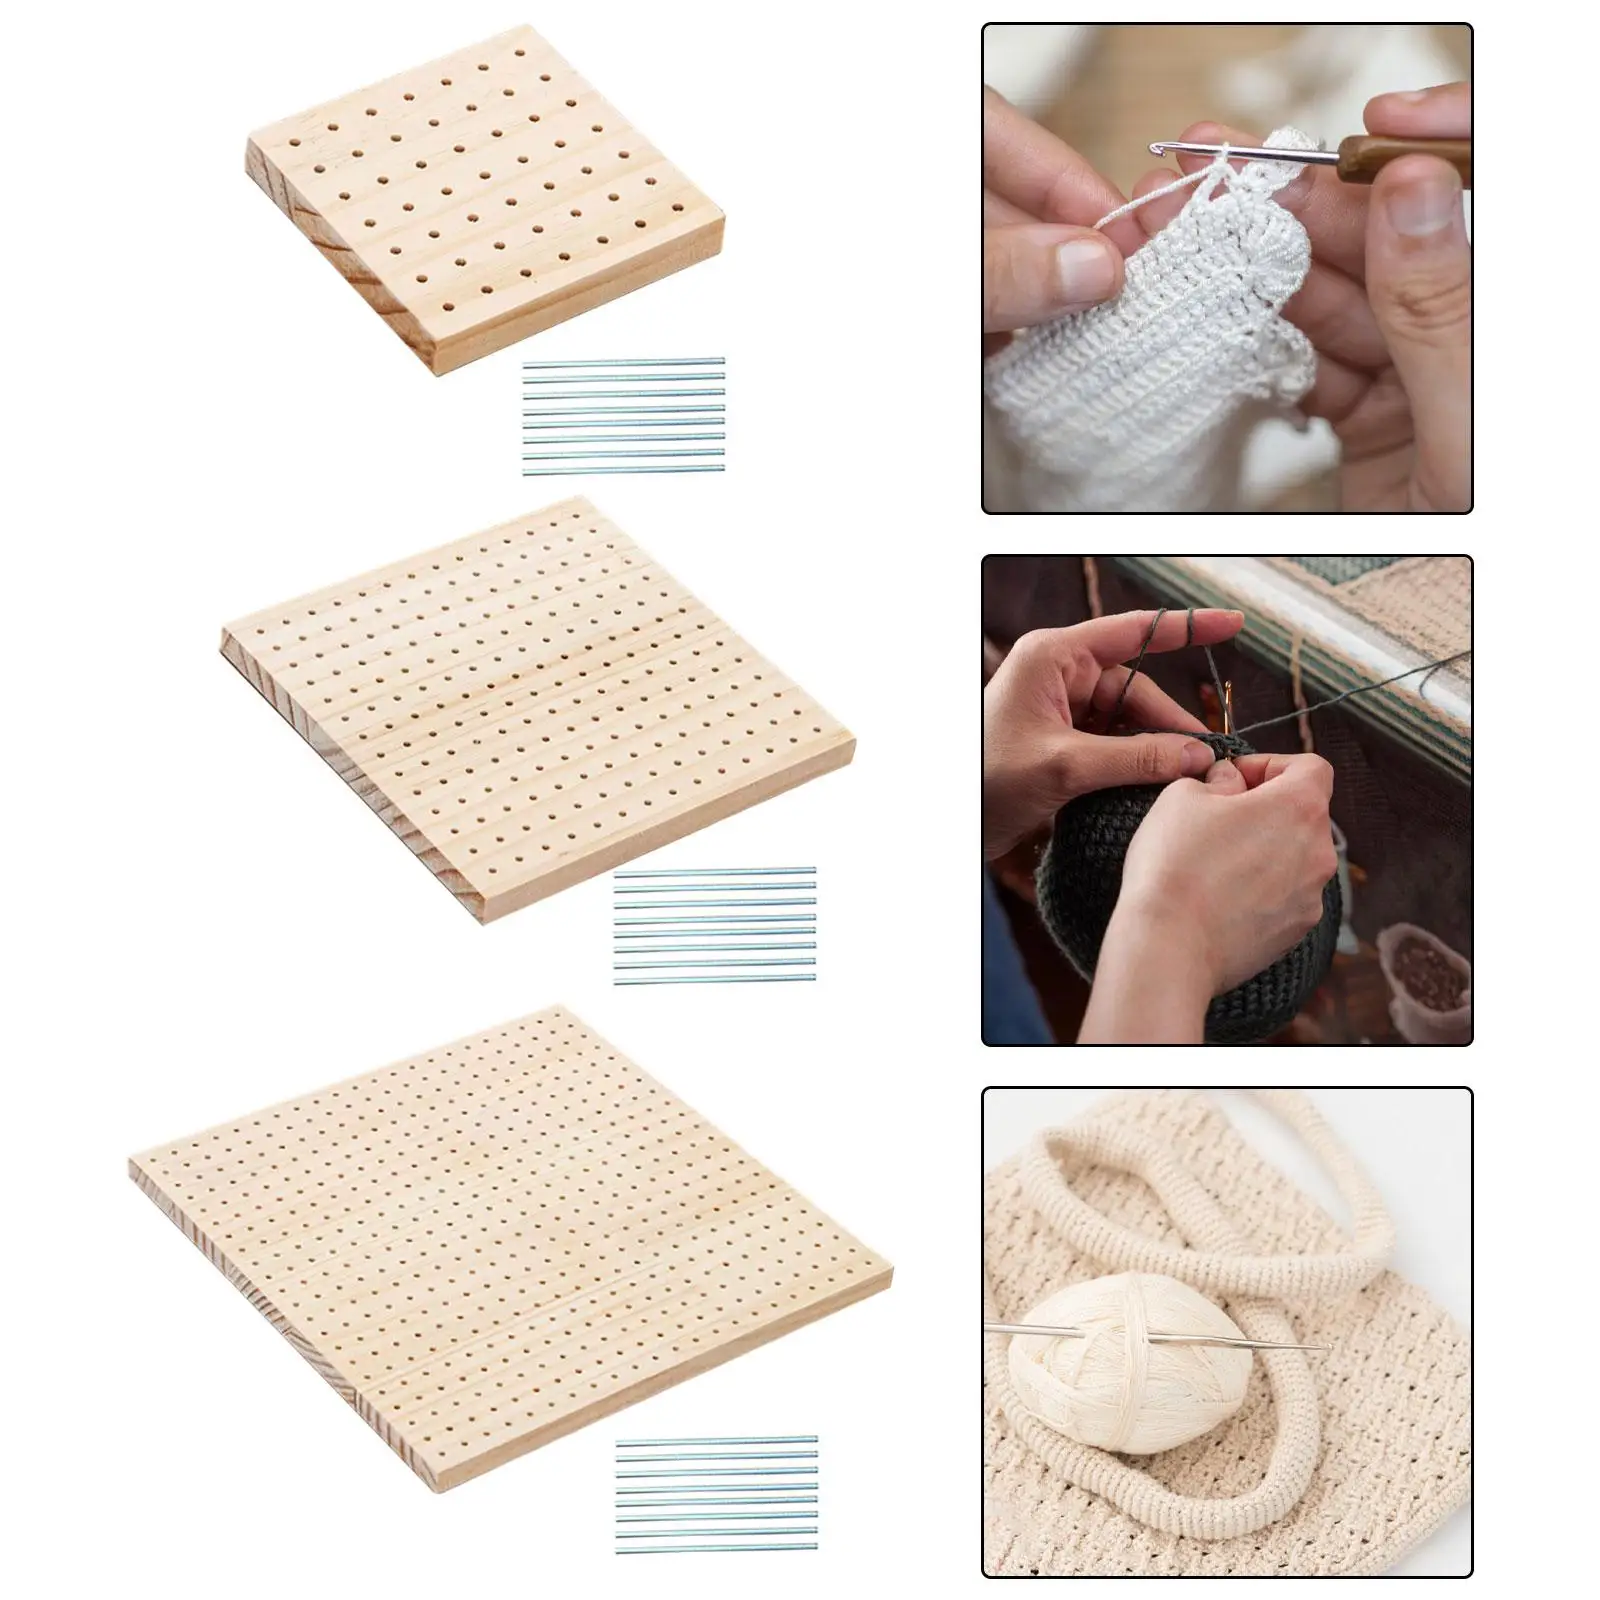 Wooden Crochet Blocking Boards with Handmade Knitting Blocking Pegs for Granny